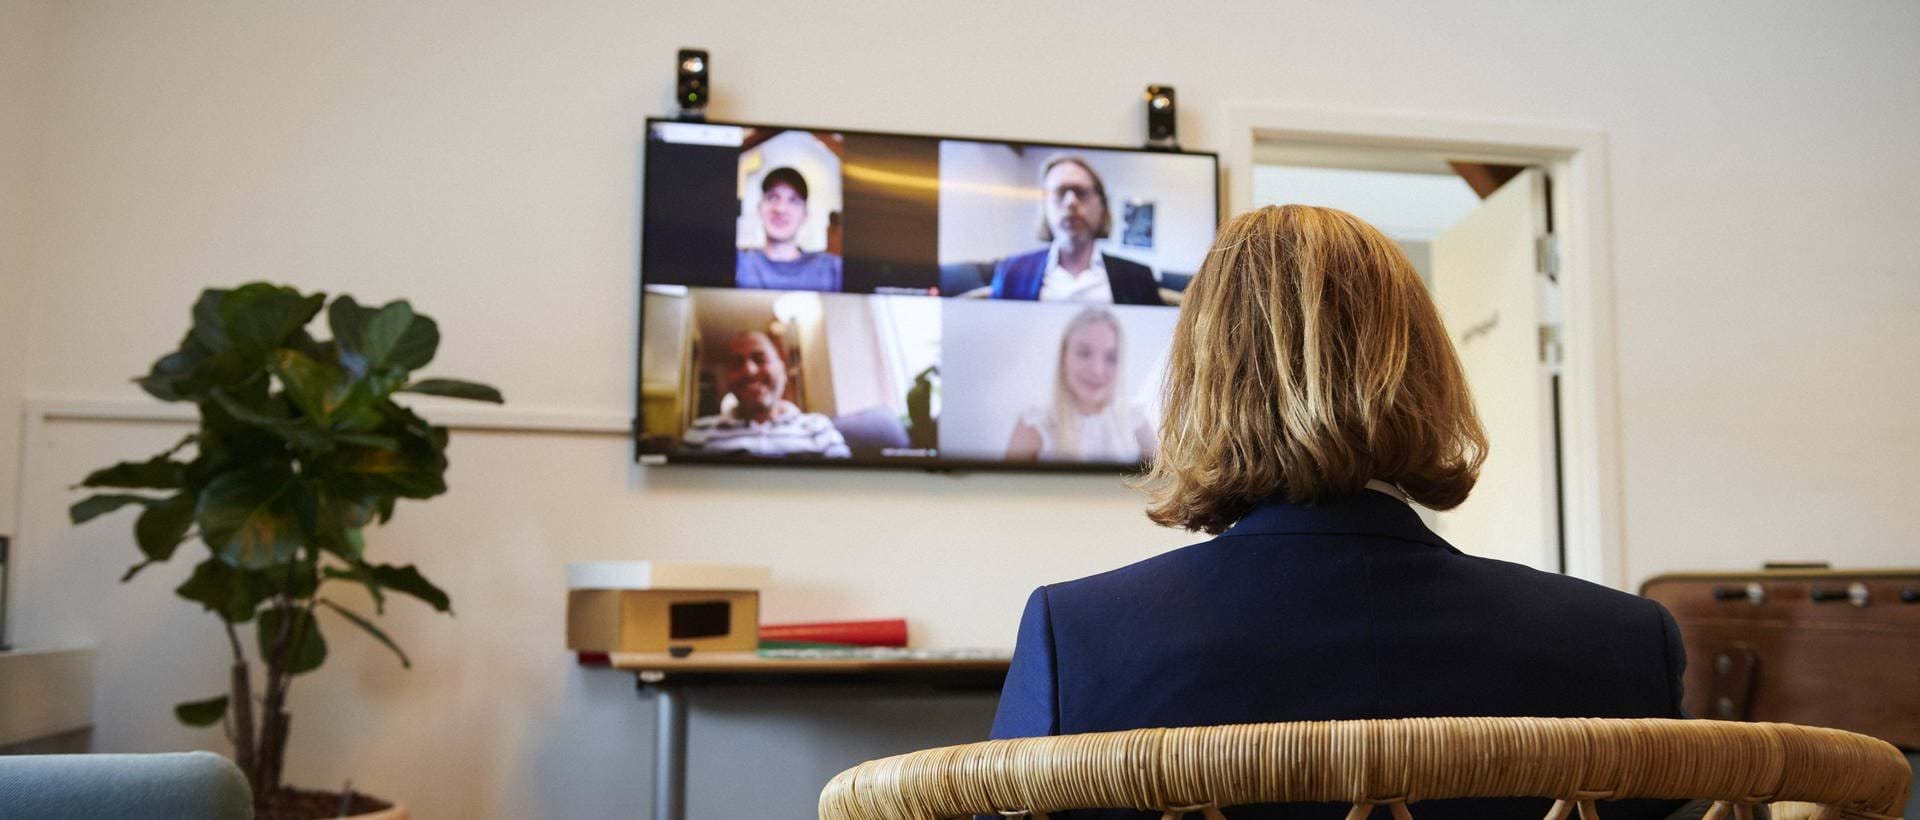 A man with long blonde hair wearing a suit sits in a chair facing some attendees in a video call on the big screen.